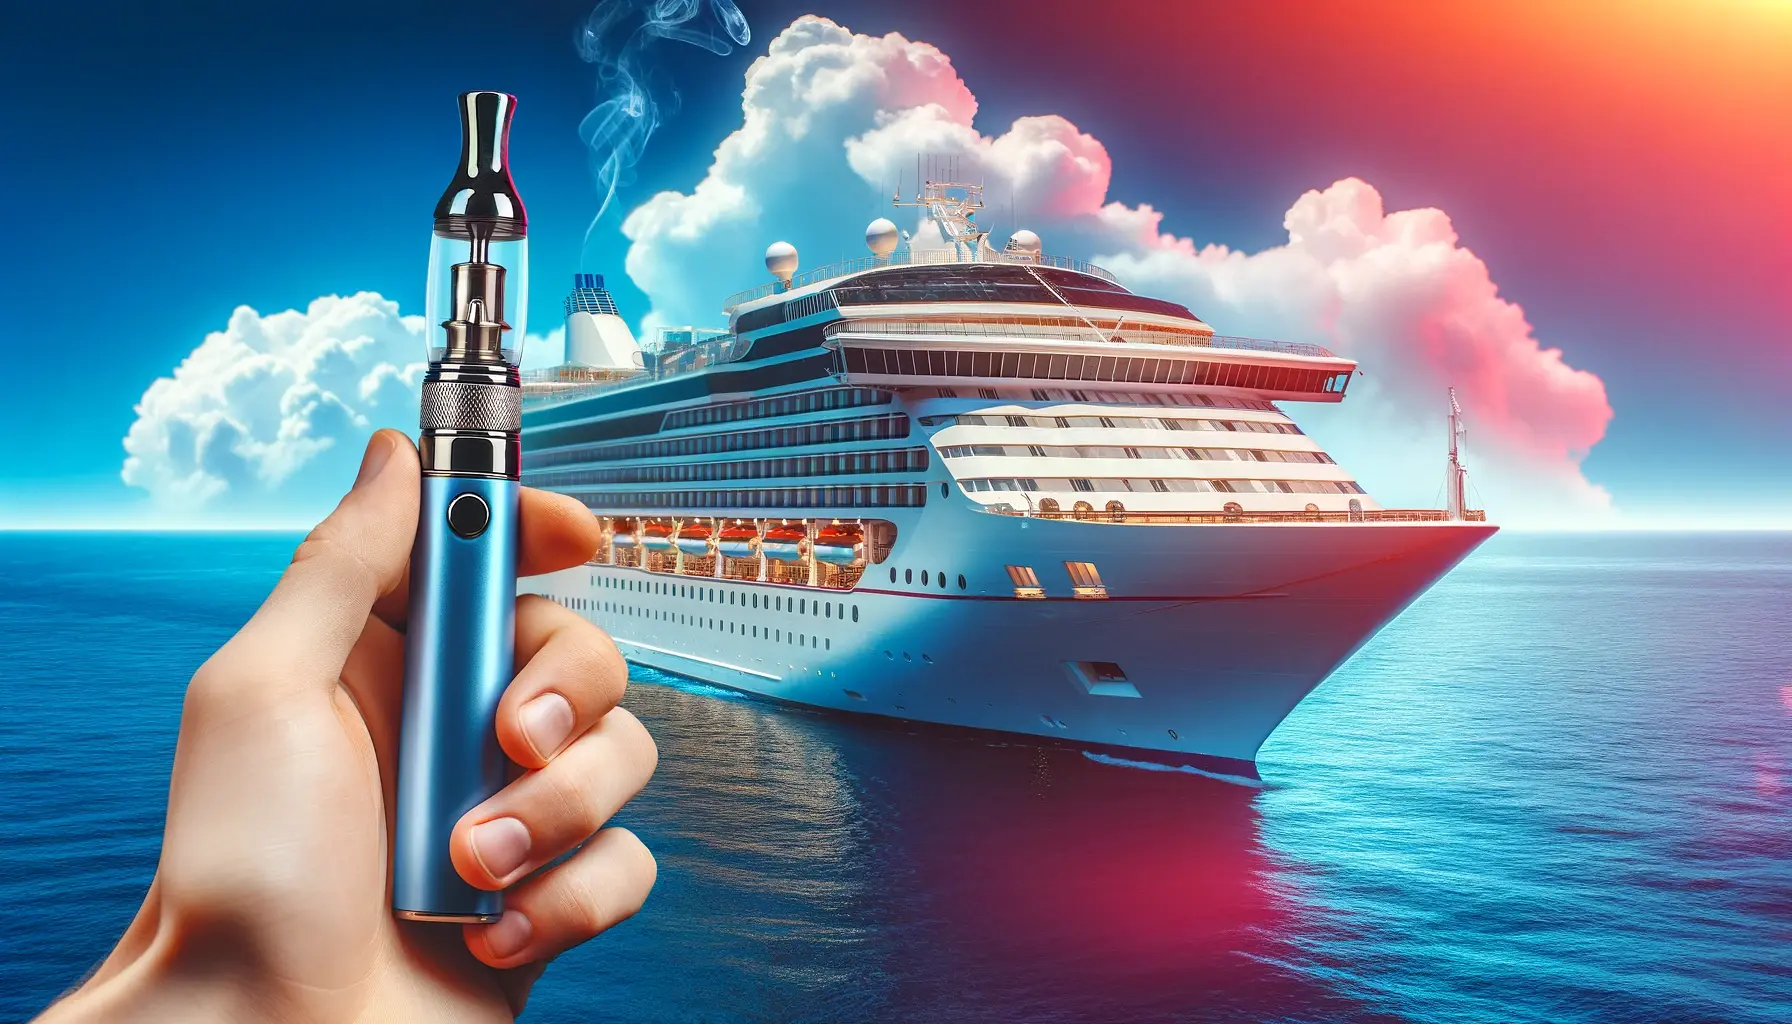 A 16:9 image depicting a cruise ship at sea with clear skies, symbolizing vacation and leisure. In the foreground, a representation of a Delta 8 vape pen, not showing any specific brand, hinting at the topic of Delta 8 usage on cruise ships. The image is vibrant, colorful, and engaging, capturing the essence of a luxurious cruise vacation juxtaposed with the controversial topic of Delta 8 pen usage.